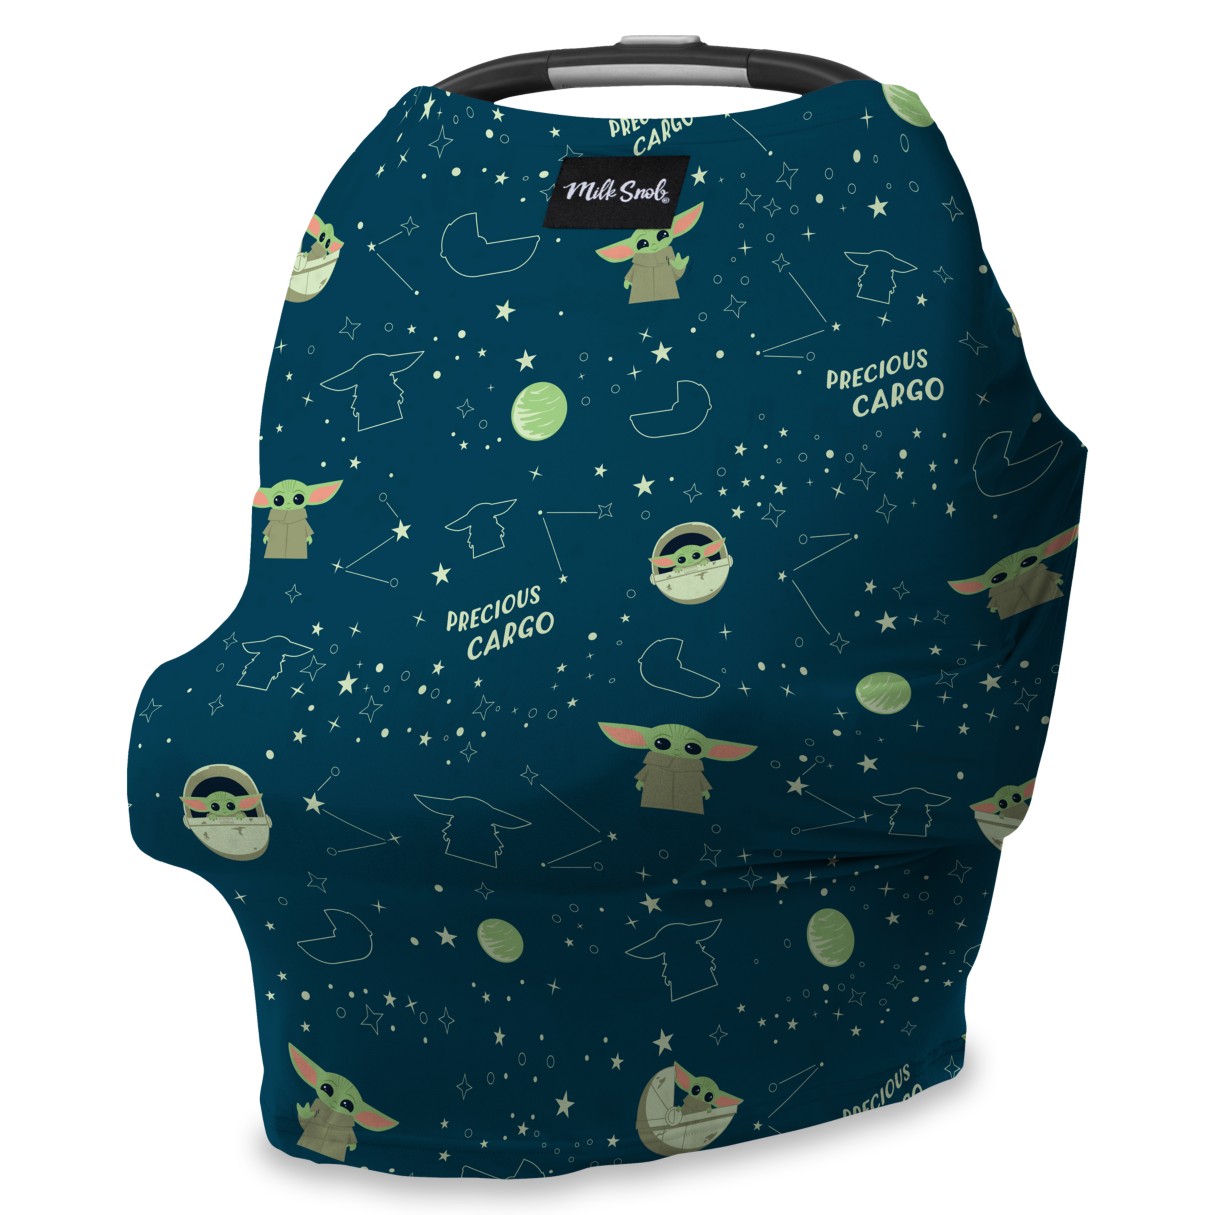 The Child Baby Seat Cover by Milk Snob – Star Wars: The Mandalorian